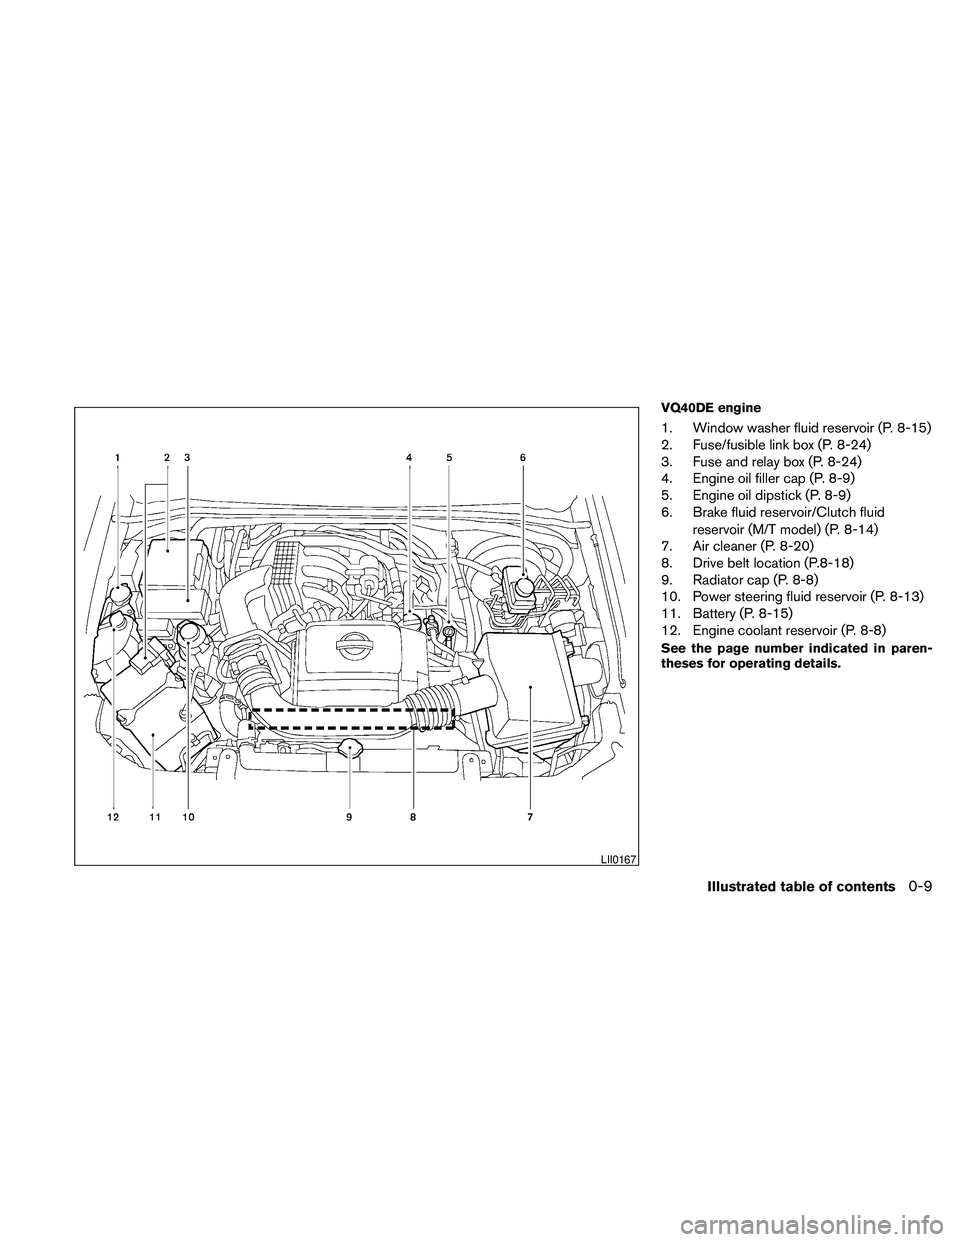 NISSAN FRONTIER 2010  Owner´s Manual VQ40DE engine
1. Window washer fluid reservoir (P. 8-15)
2. Fuse/fusible link box (P. 8-24)
3. Fuse and relay box (P. 8-24)
4. Engine oil filler cap (P. 8-9)
5. Engine oil dipstick (P. 8-9)
6. Brake f